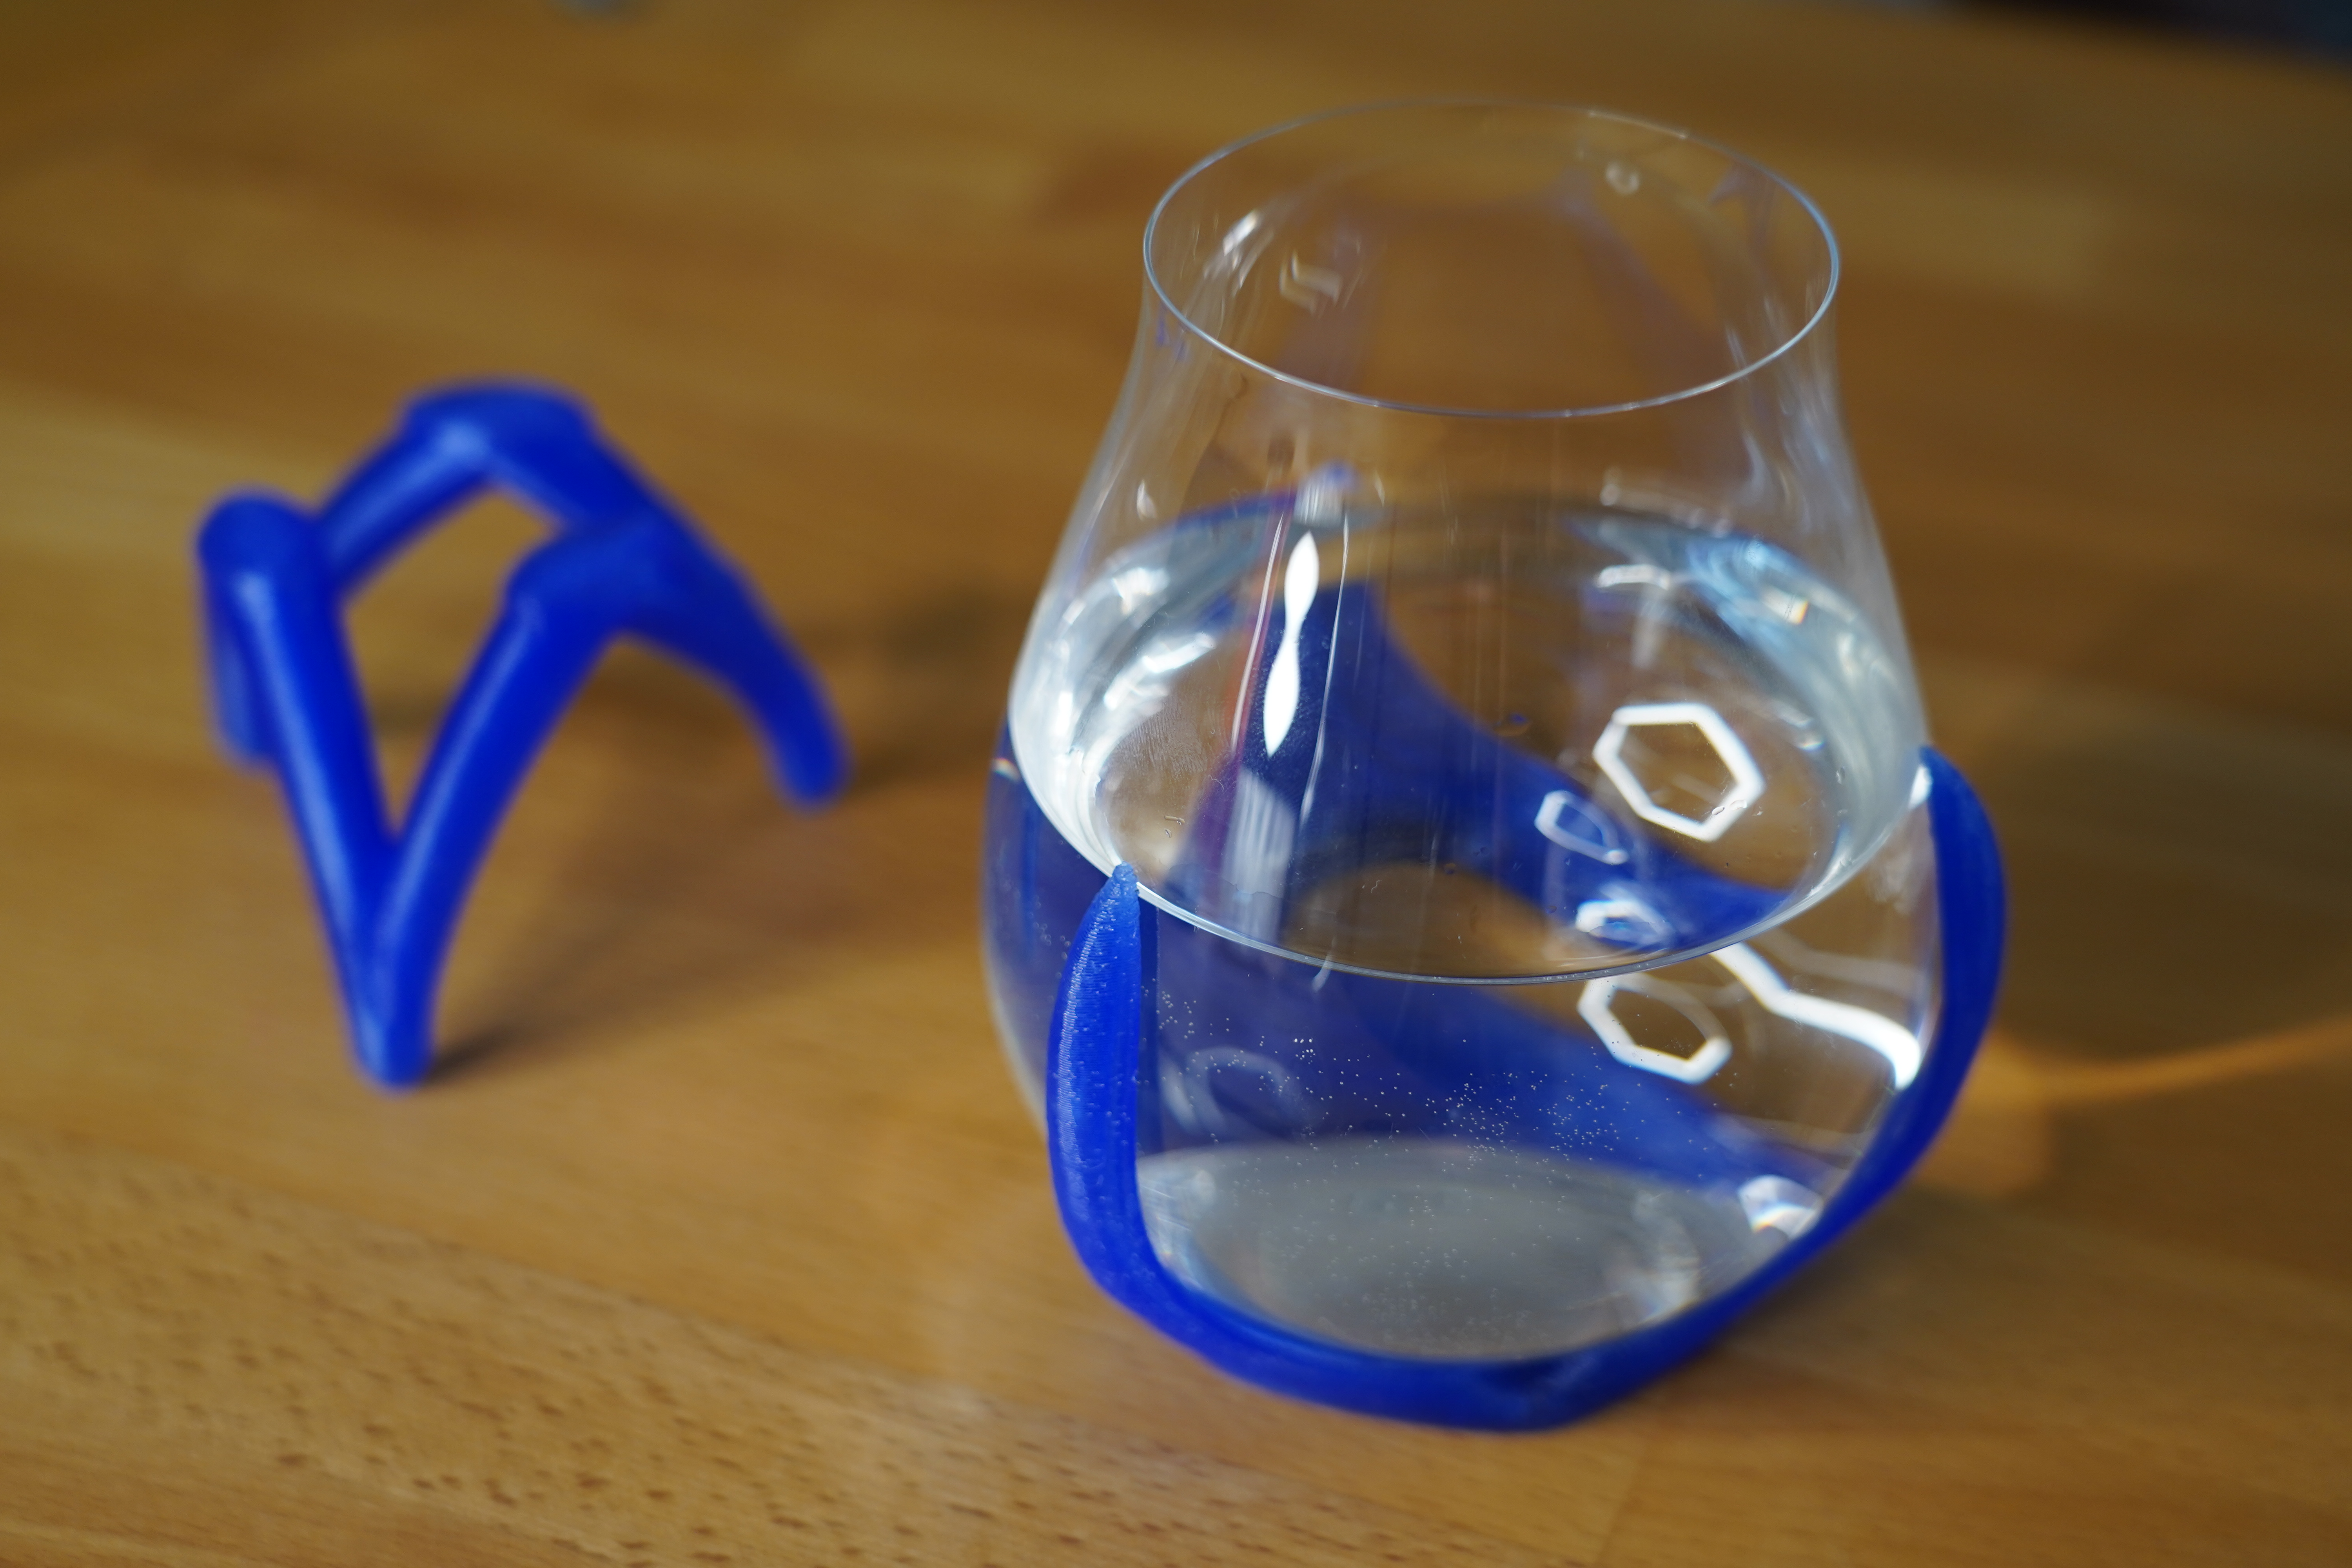 Clip-on coasters with easy & fast silicone feet